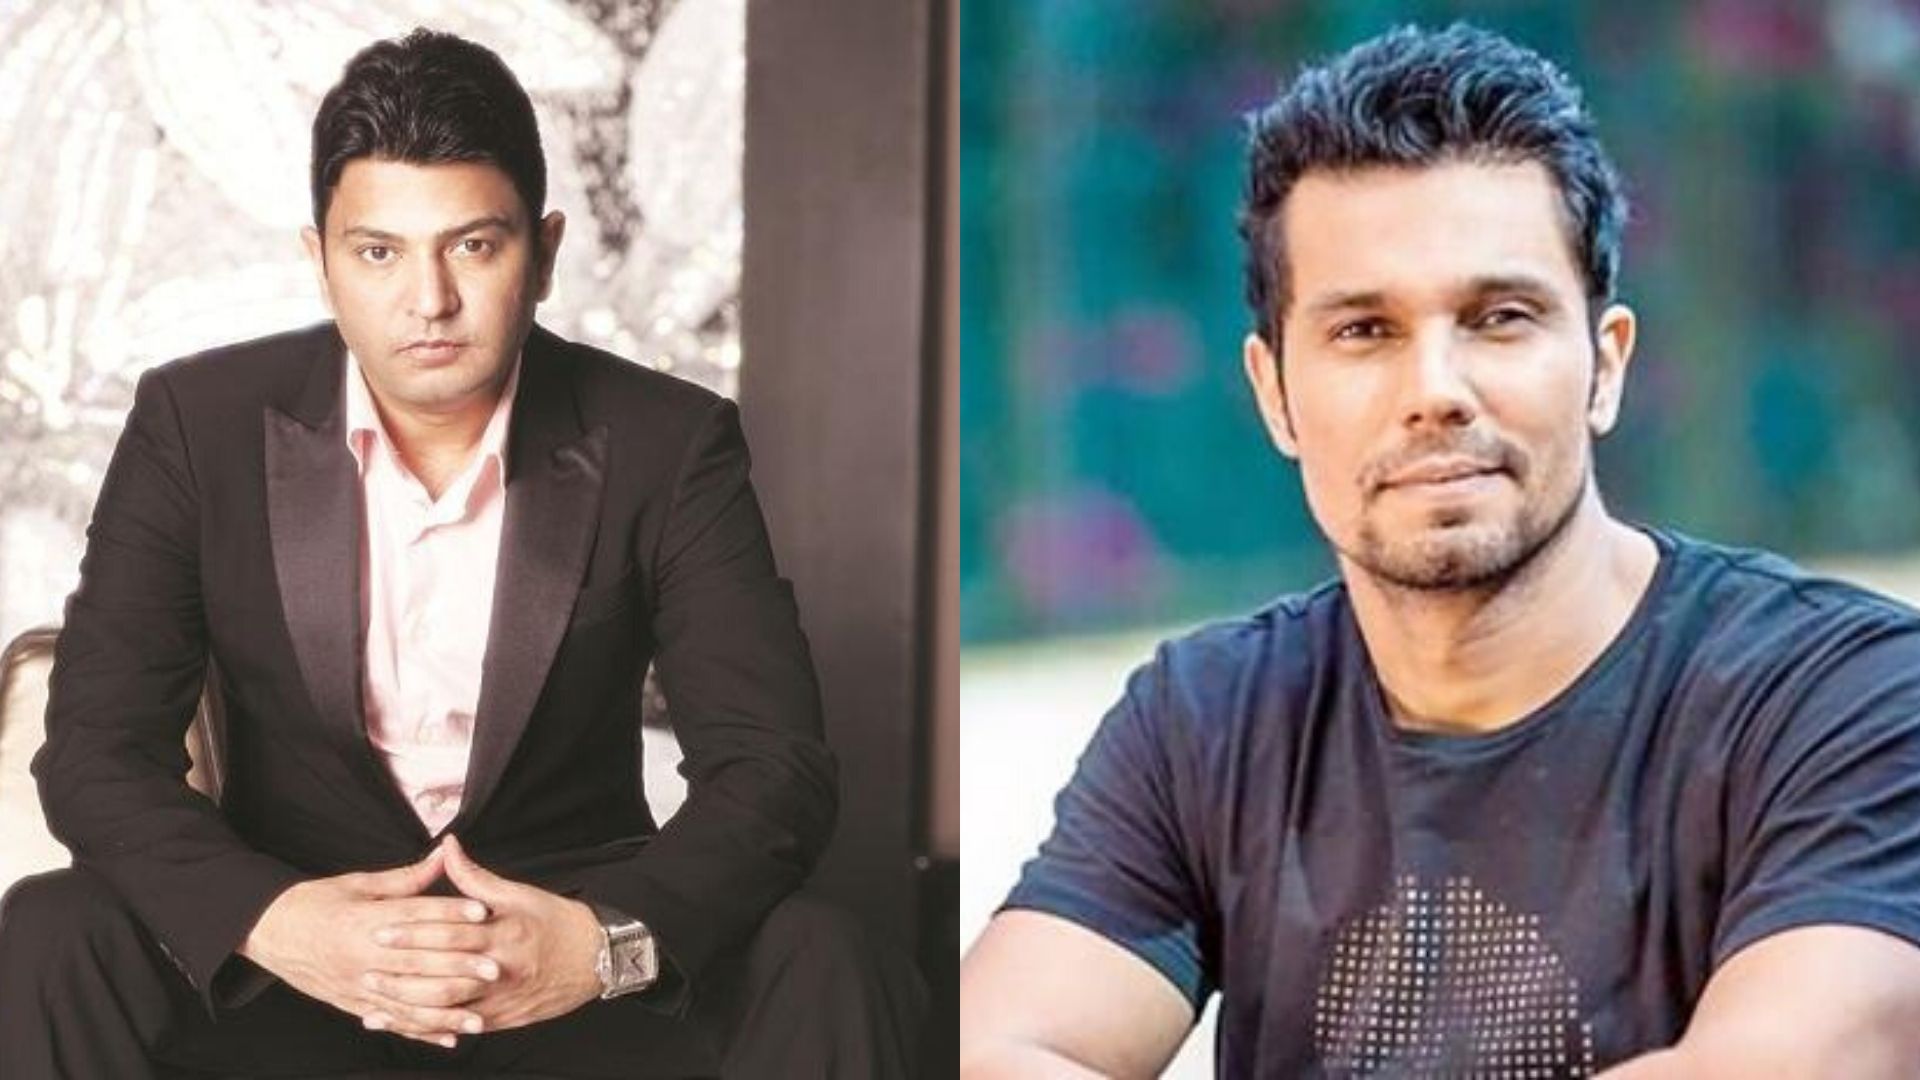 T-Series owner Bhushan Kumar donates Rs 12 crores for COVID-19 relief; Randeep Hooda, Jay Patel contribute Rs 1 crore